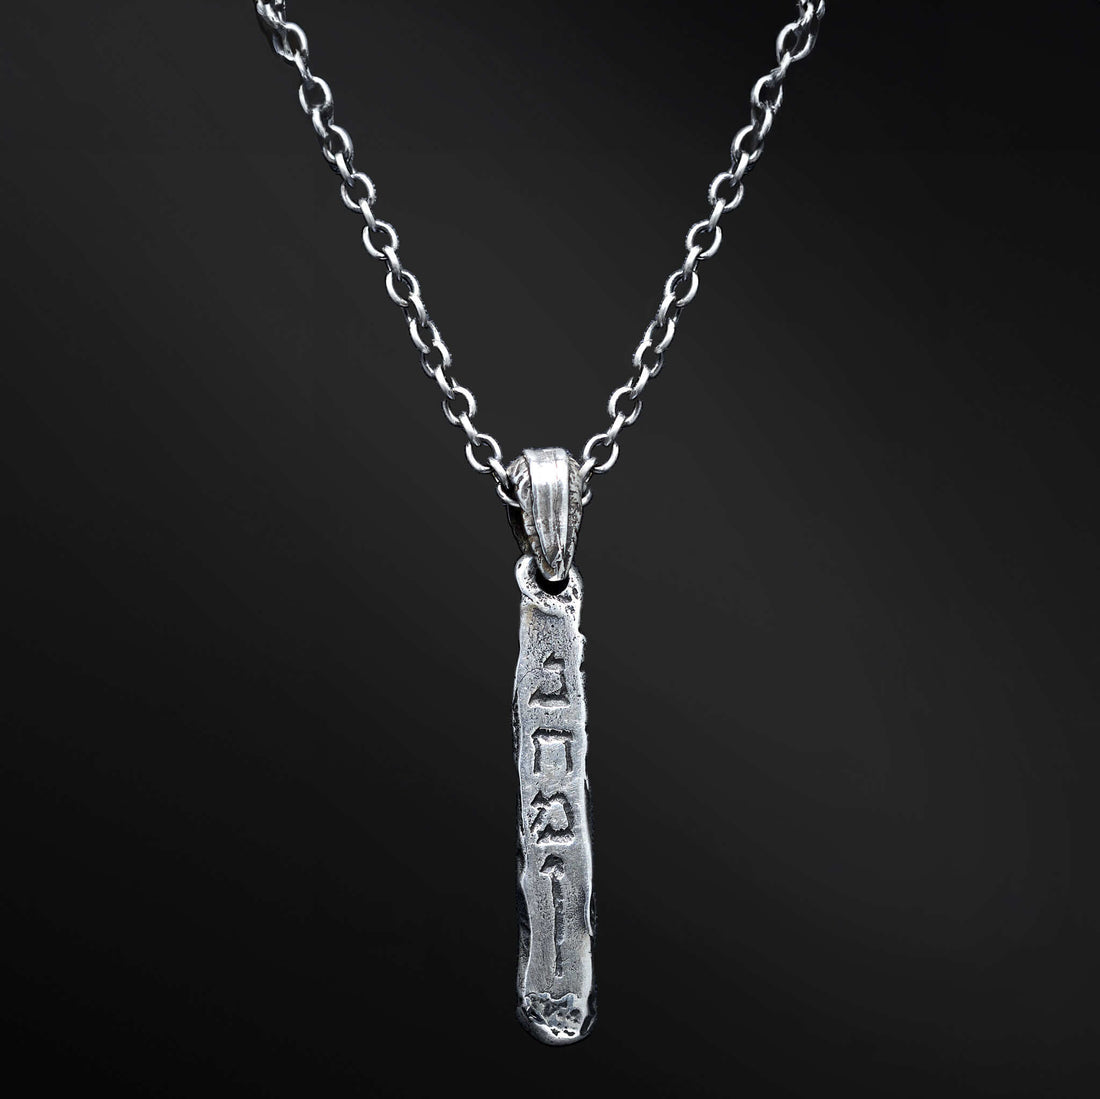 &quot;Markel Pendant: An image of the empowering Markel pendant. The sleek design features an engraving of the word &